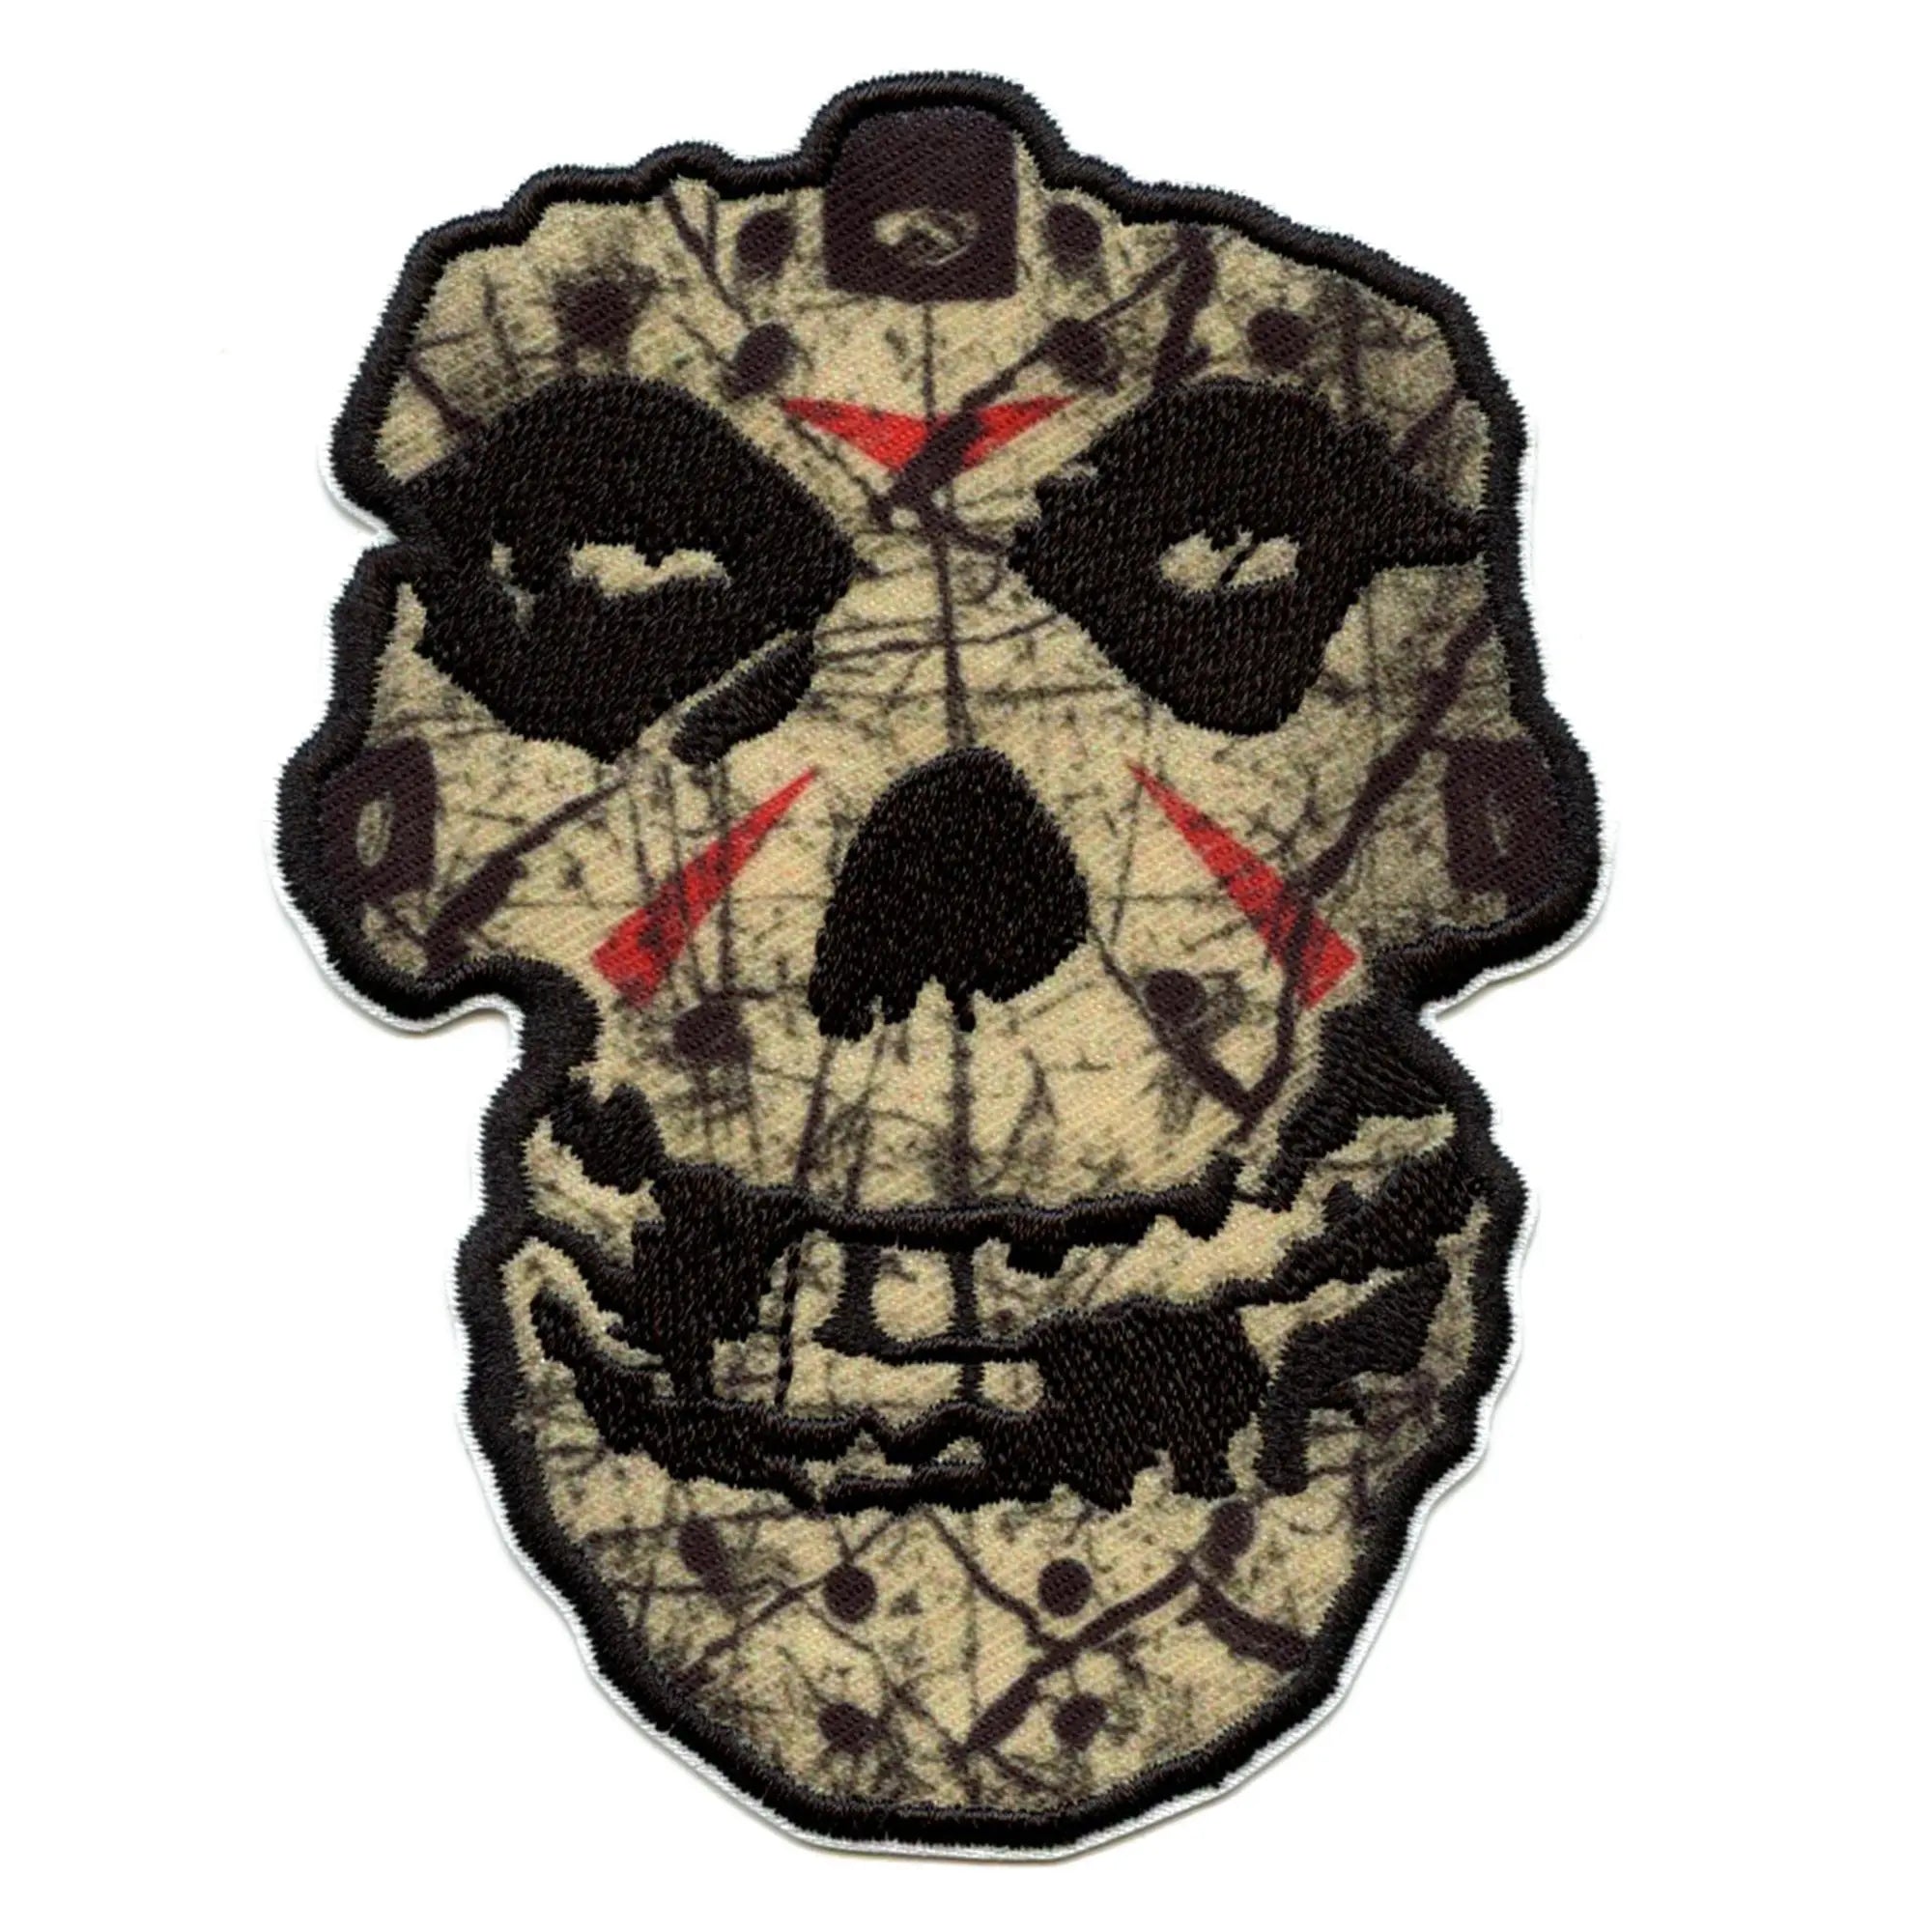 Classic Horror Characters Embroidered Iron on Patch Set of 3